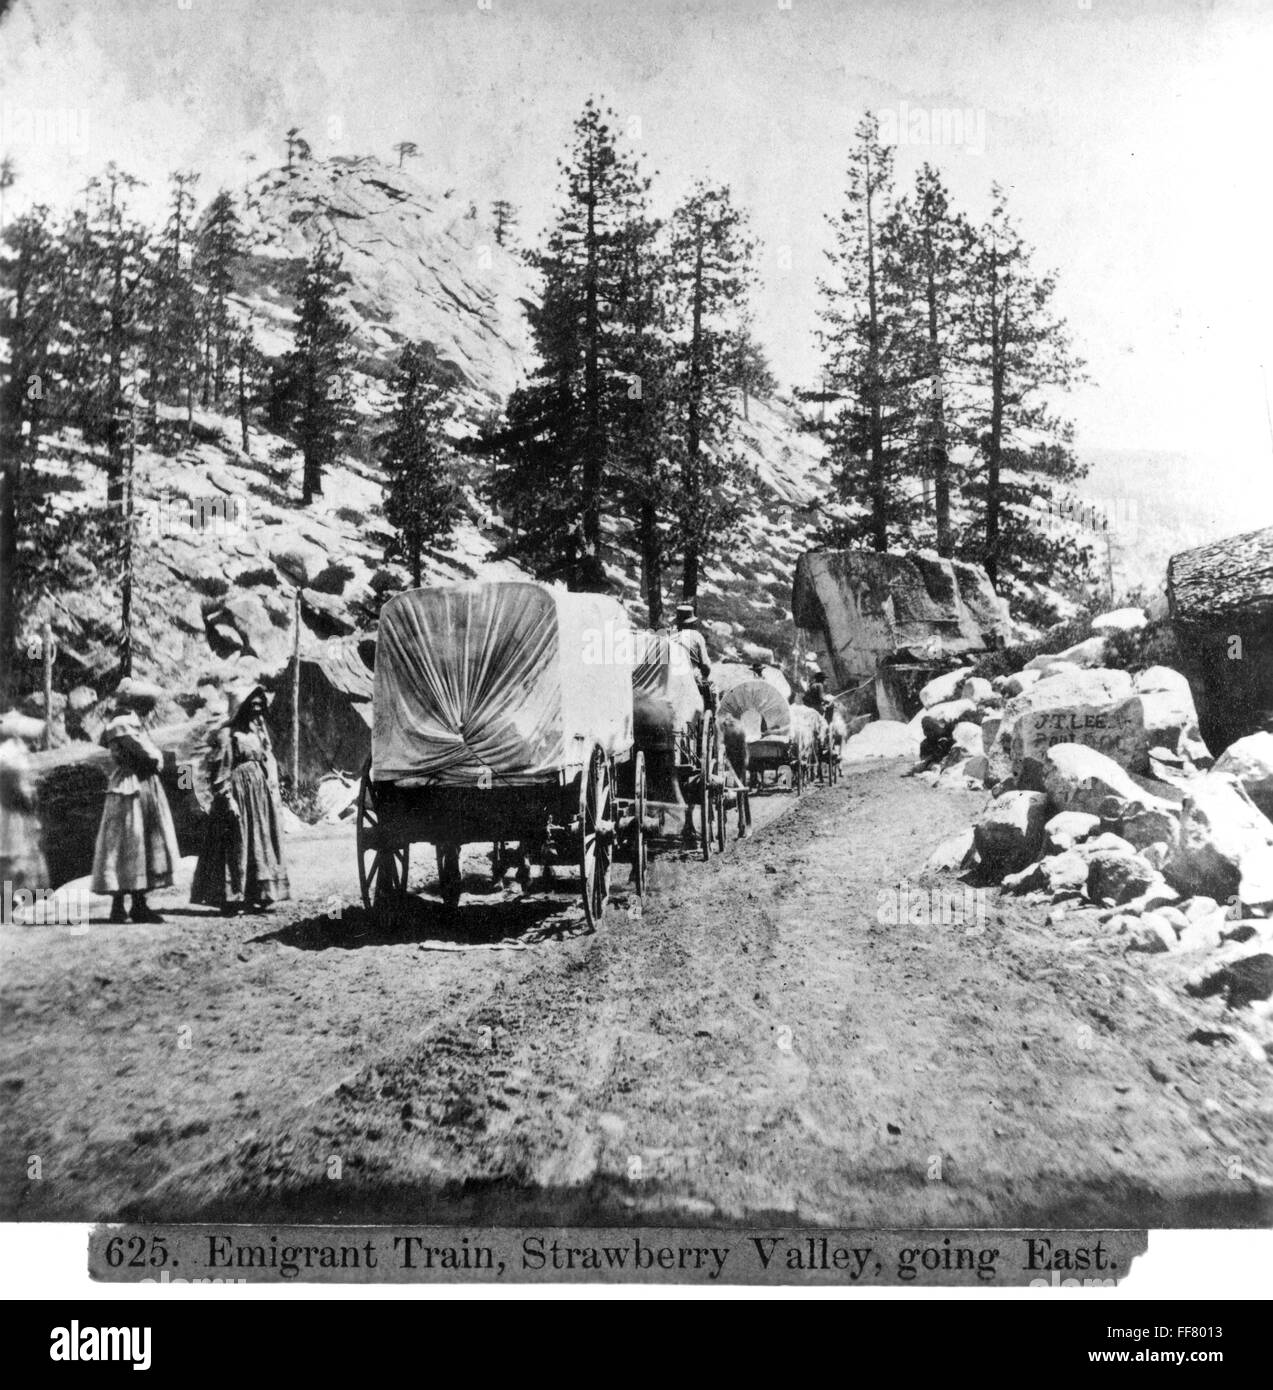 EMIGRANTS, 1866. /nAn emigrant train going east through the Strawberry Valley in the Sierra Nevada Mountains of California, 1866. Stock Photo